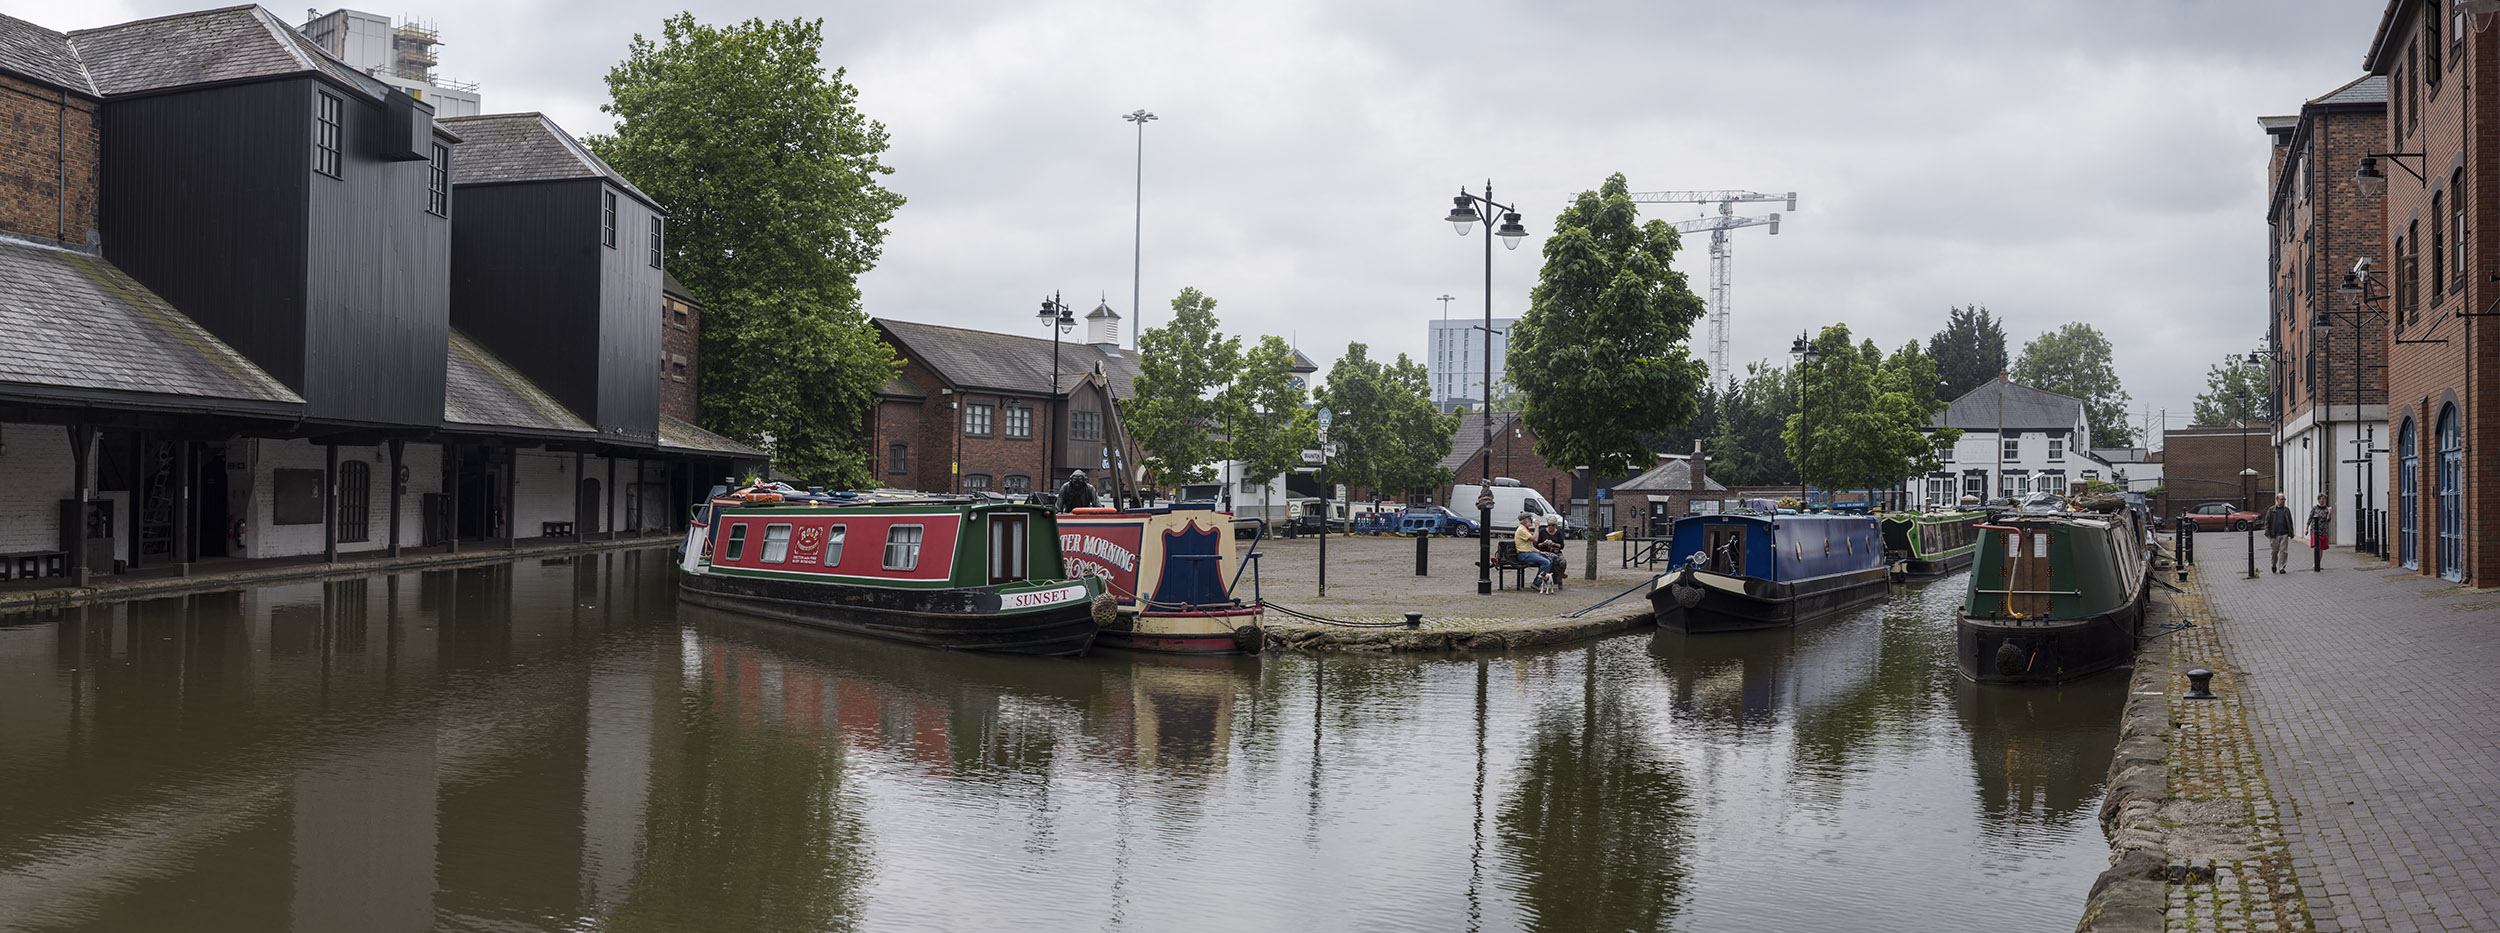 Coventry canal with canal boats